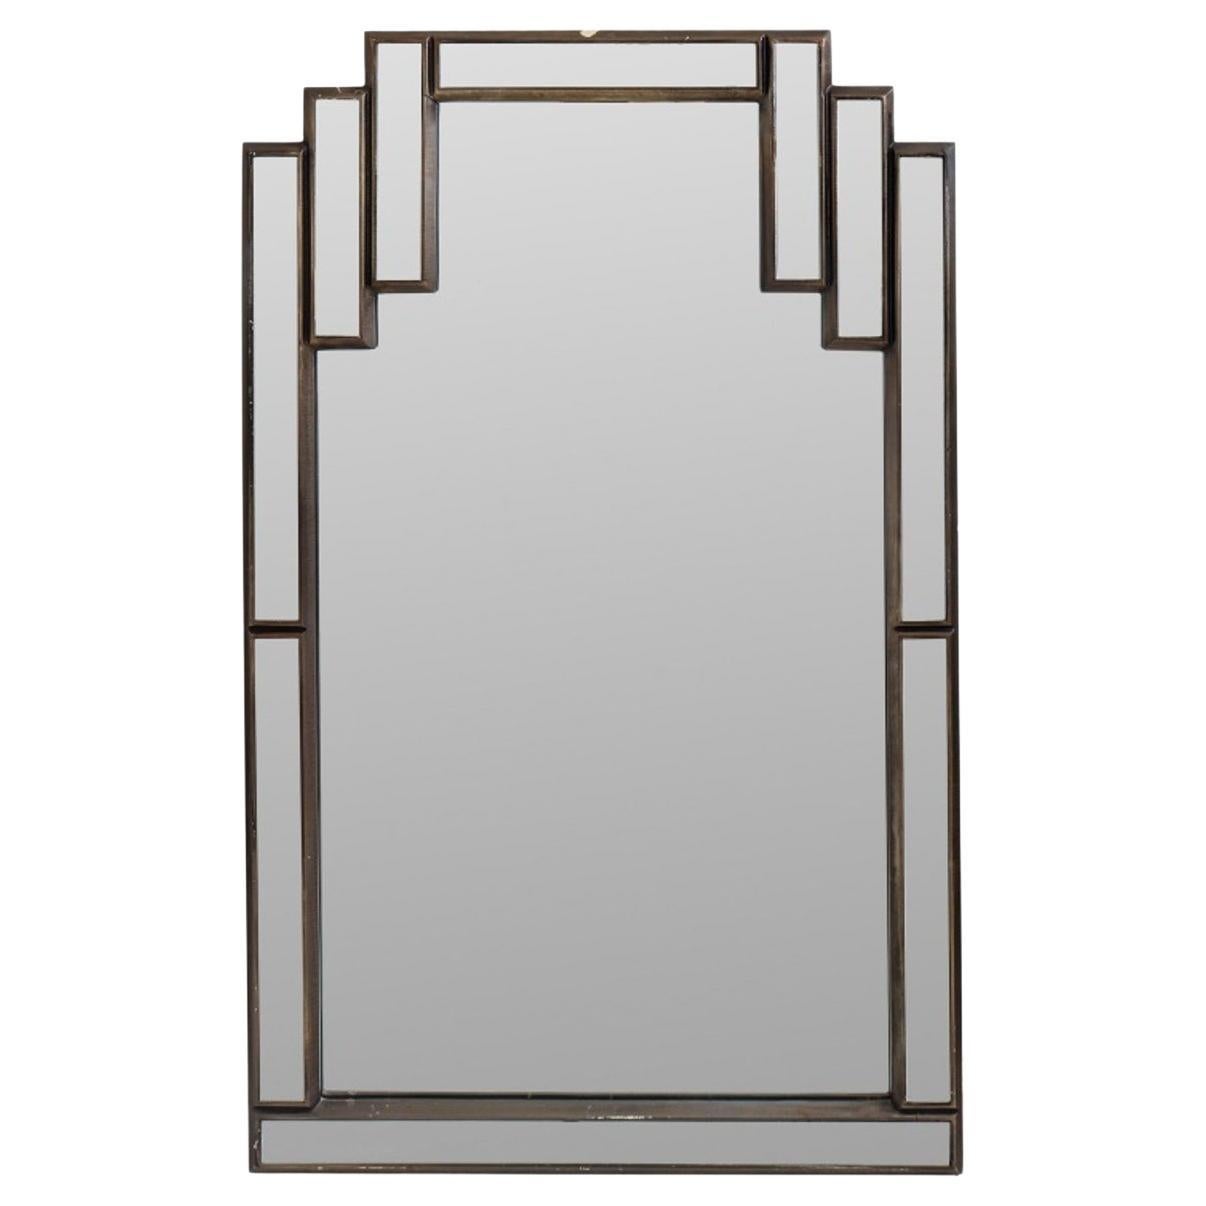 Art Deco Gampel-Stoll Style Skyscraper Wall Mirror For Sale